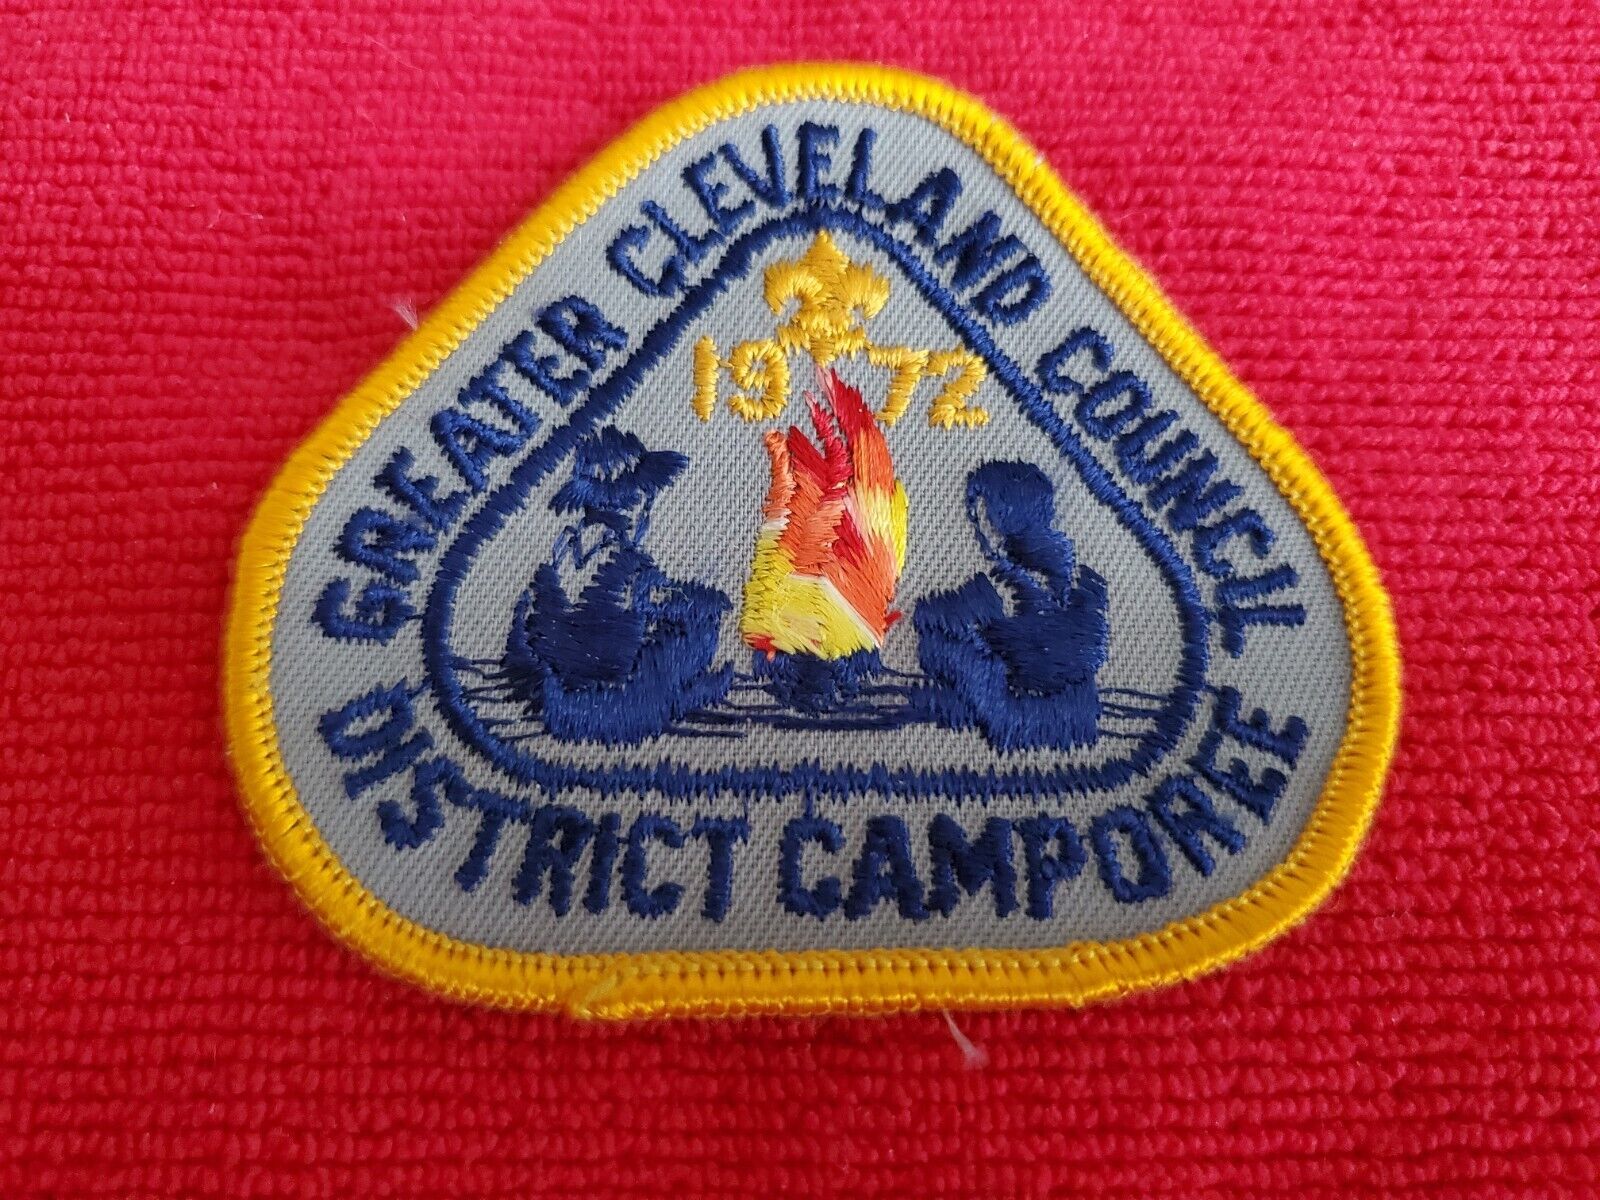 1972 Greater Cleveland Council District Camporee Pocket Patch